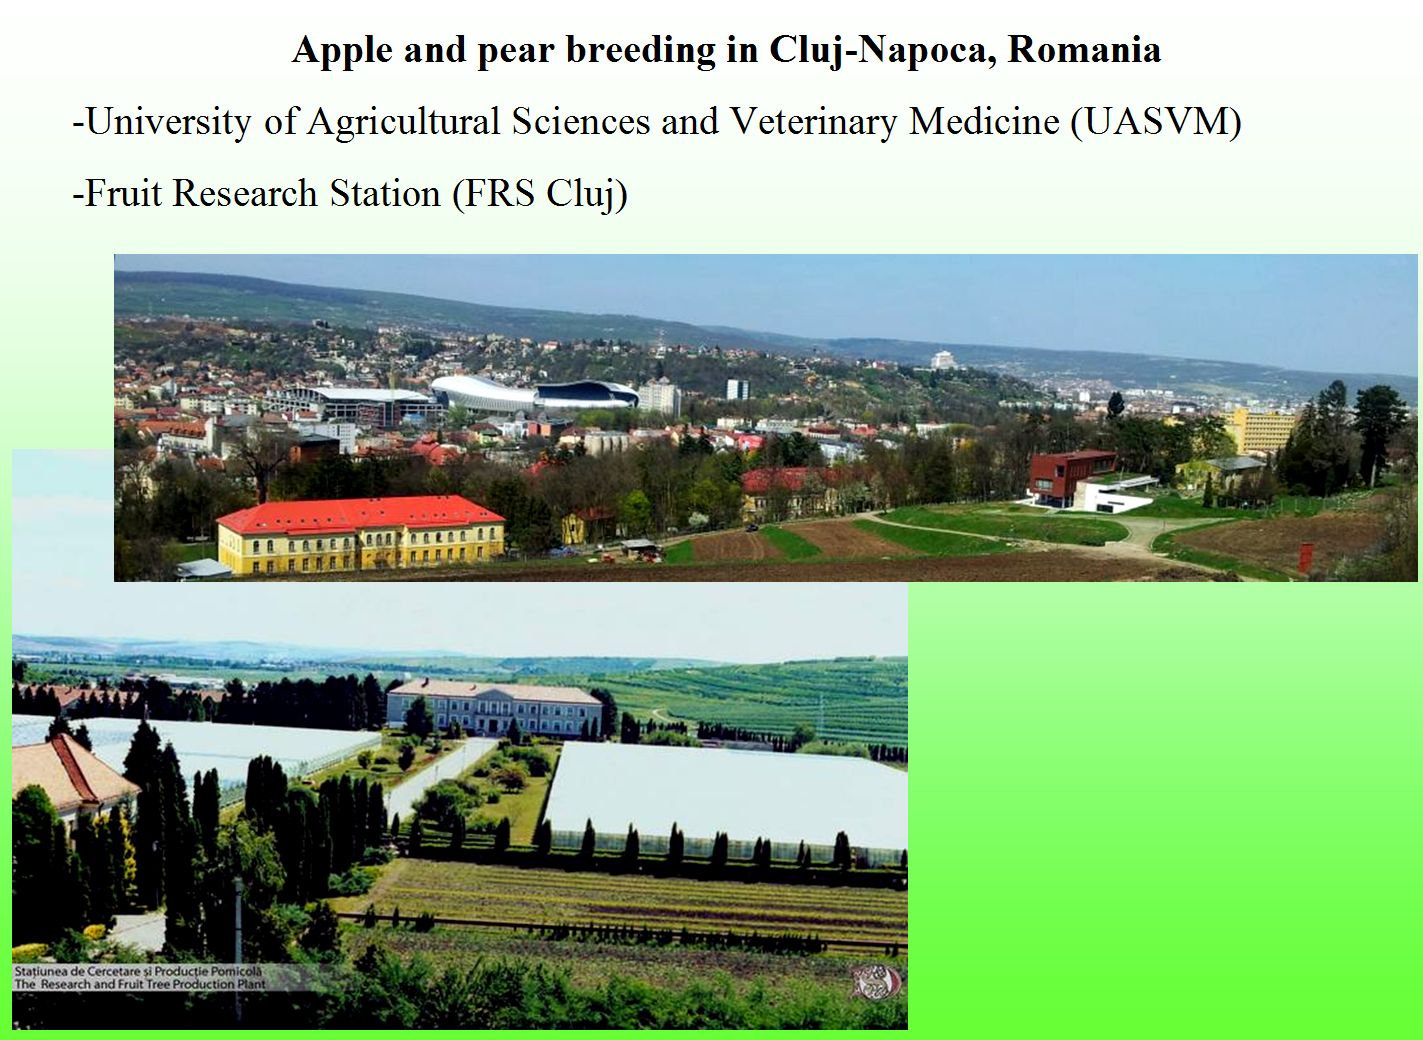 Apple and pear breeding in Cluj-Napoca 1